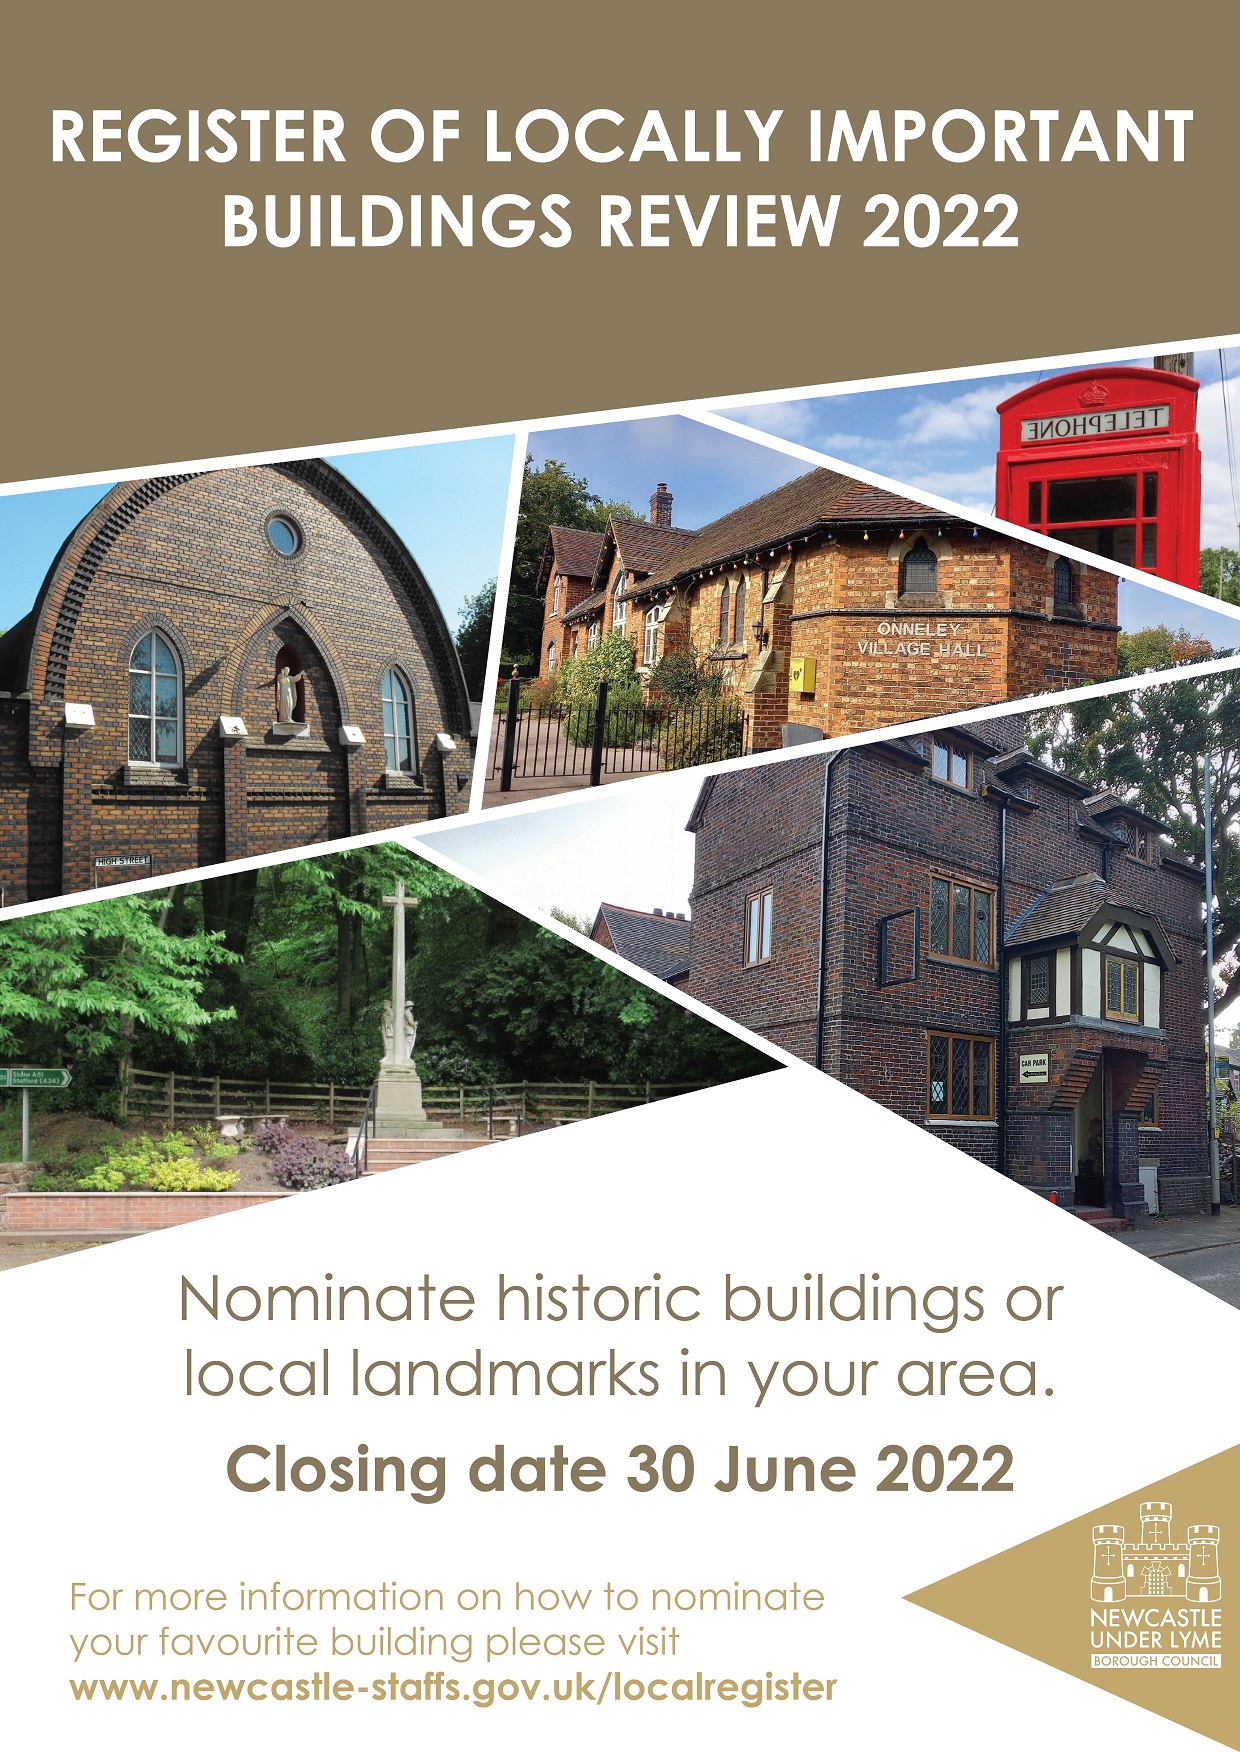 Register Of Locally Important Buildings Review 2022 2022 Registration 